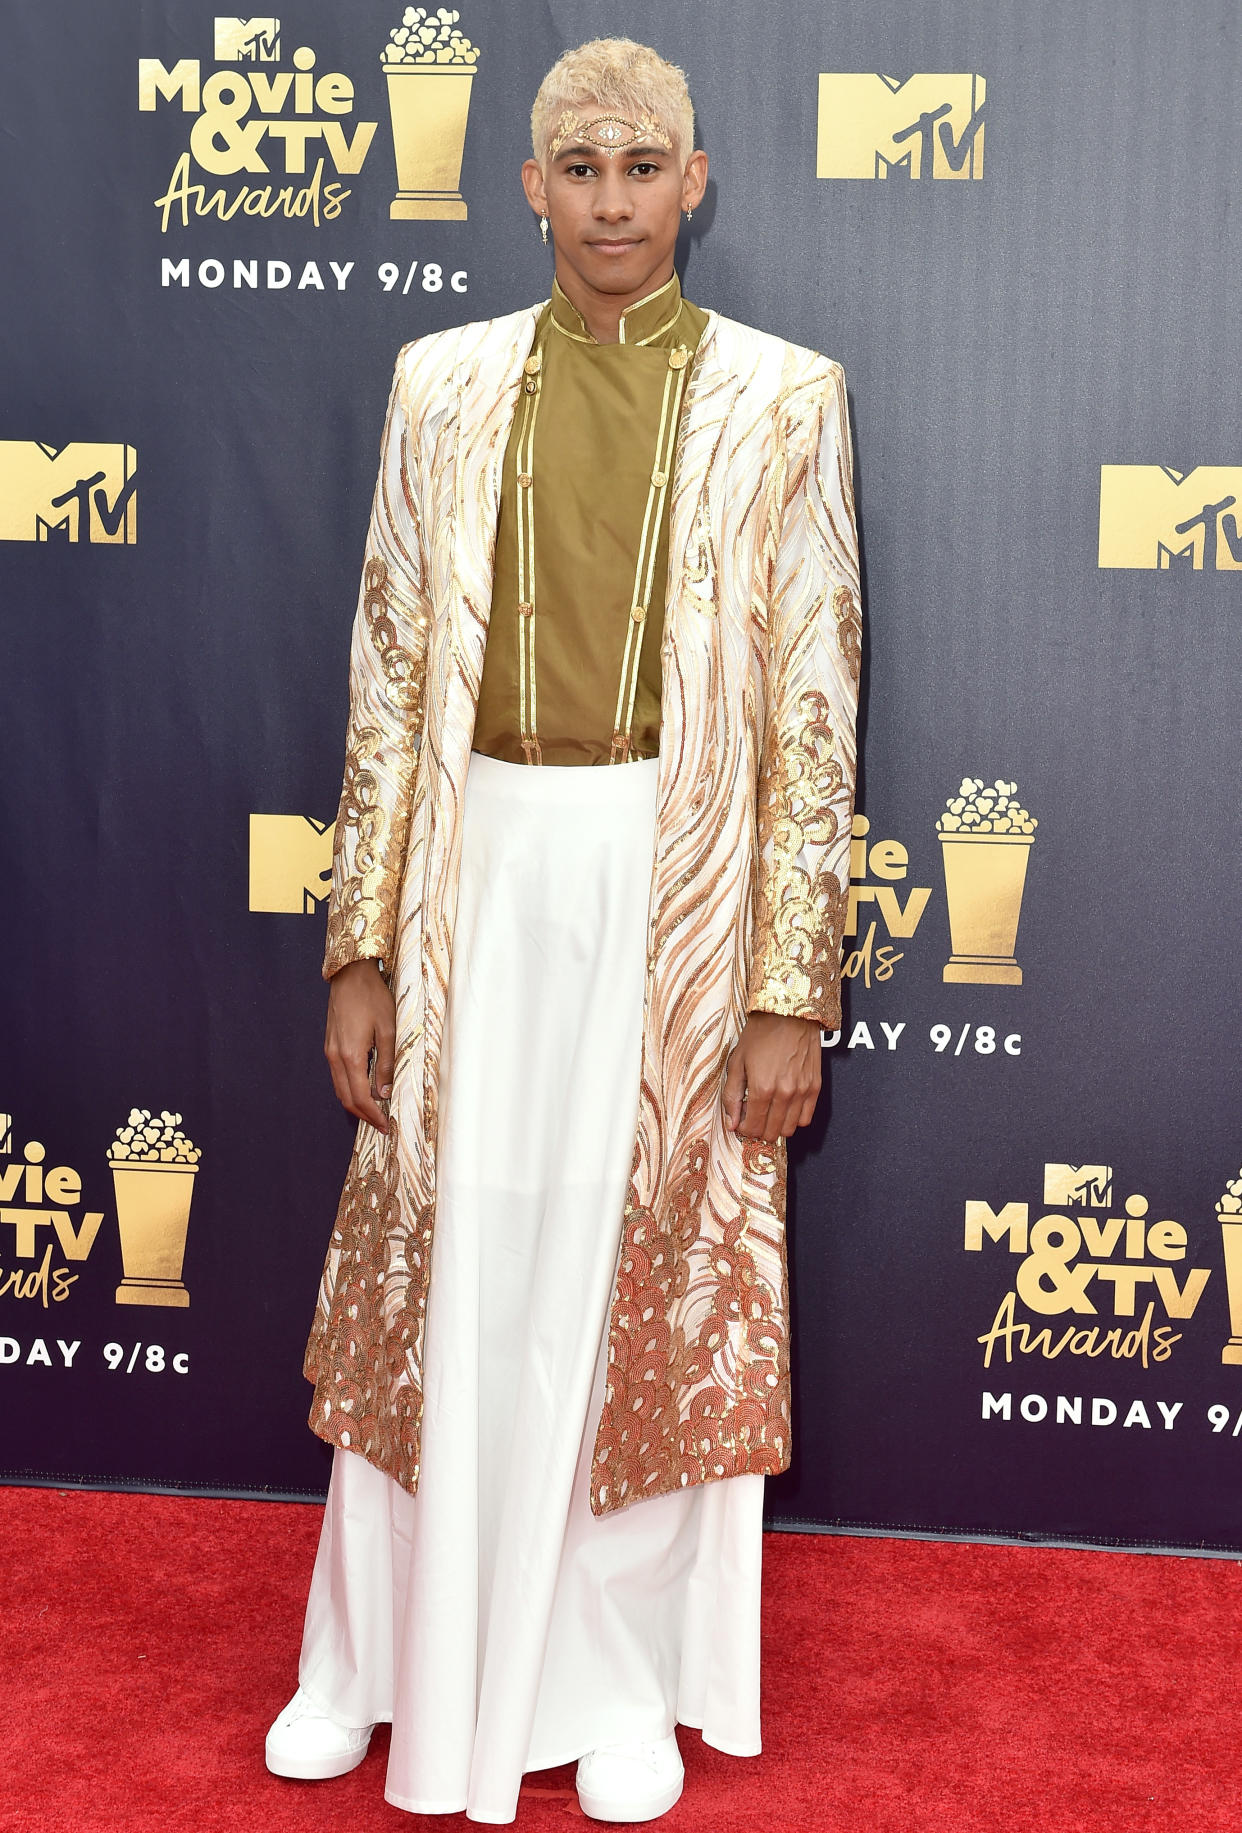 Keiynan Lonsdale at the 2018 MTV Movie And TV Awards in Santa Monica, Calif. (Photo: Axelle/Bauer-Griffin/FilmMagic)